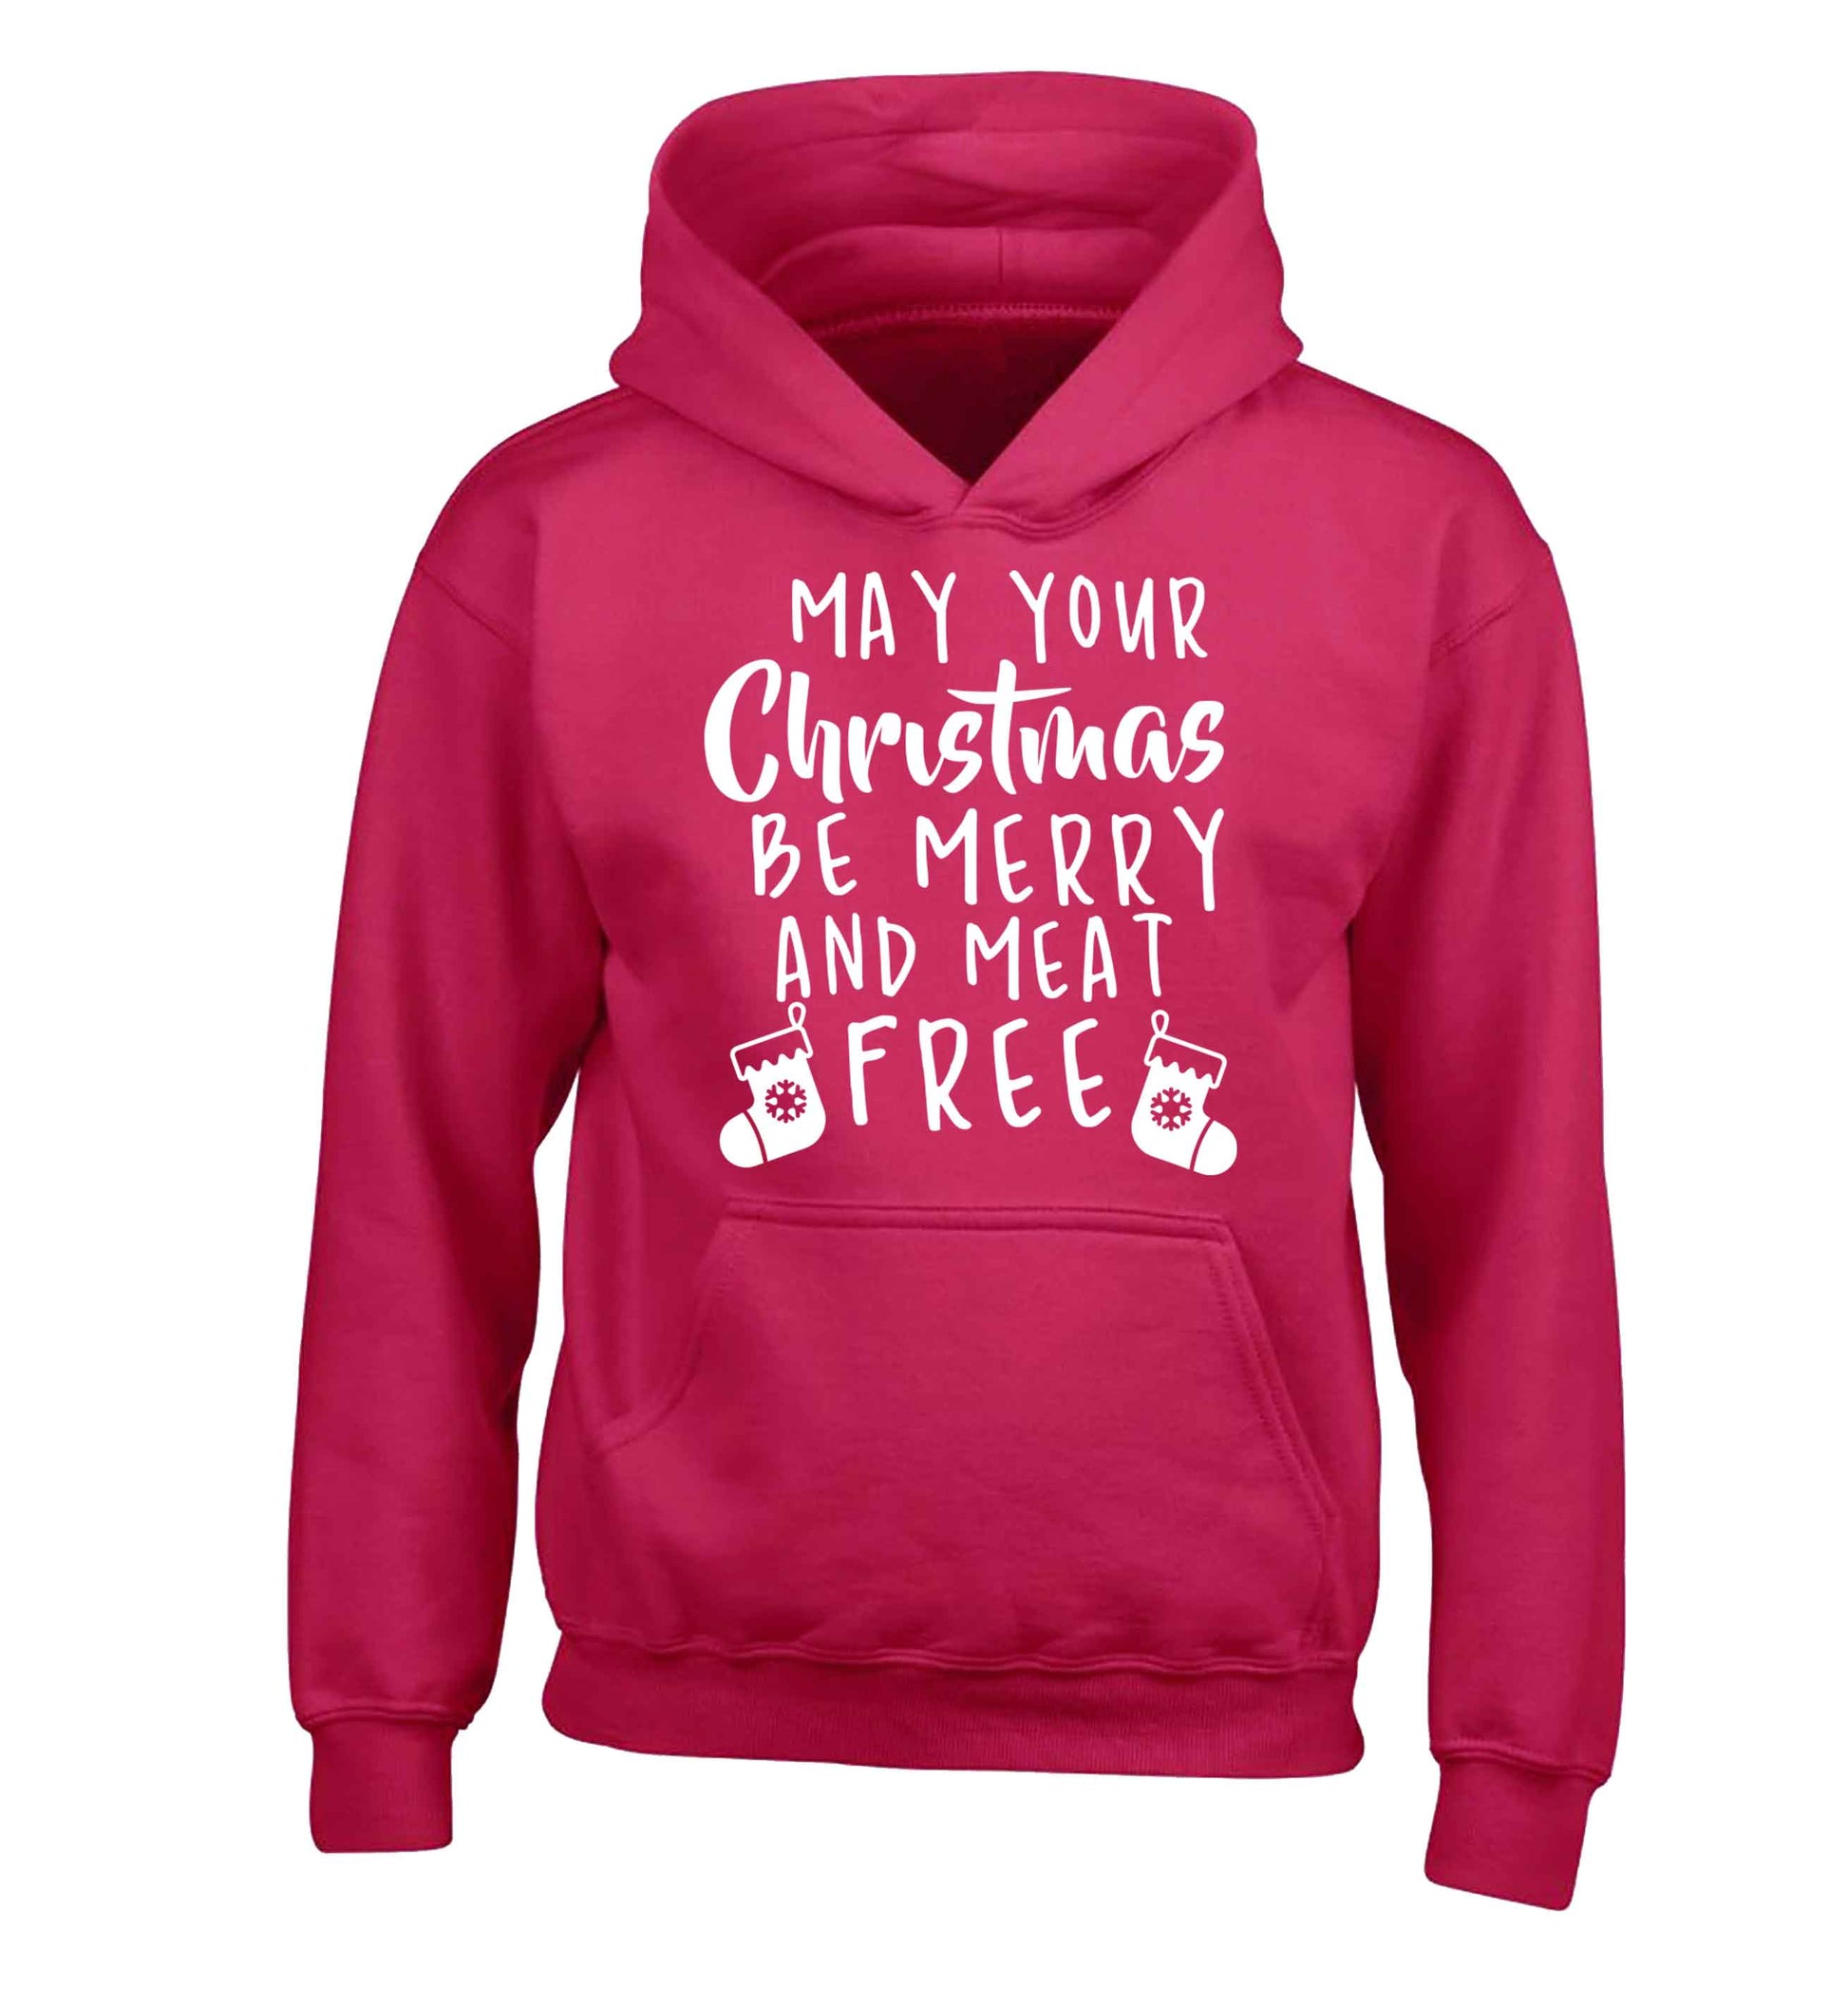 May your Christmas be merry and meat free children's pink hoodie 12-13 Years